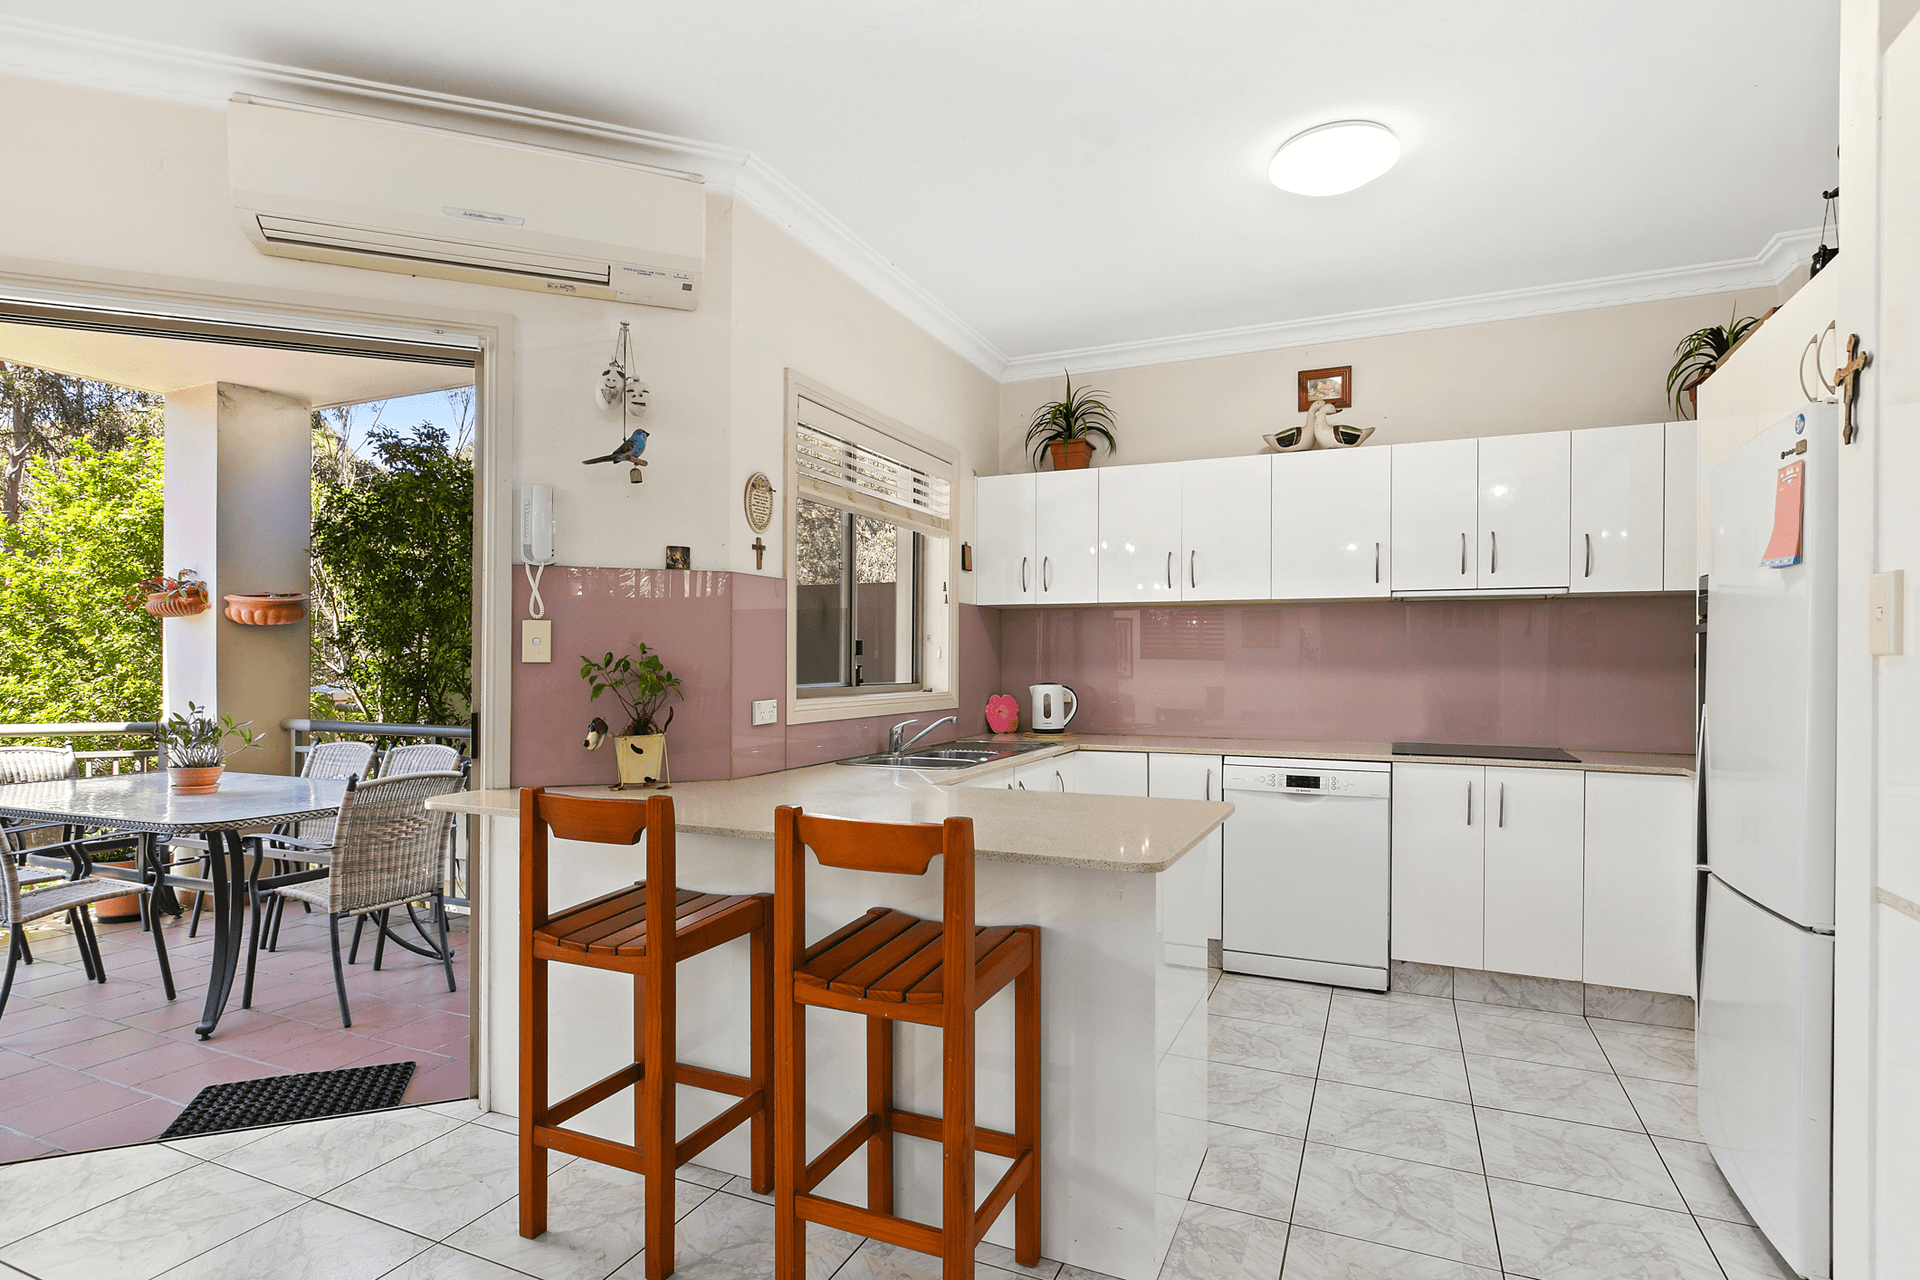 8/57 Jervis Drive, Illawong, NSW 2234